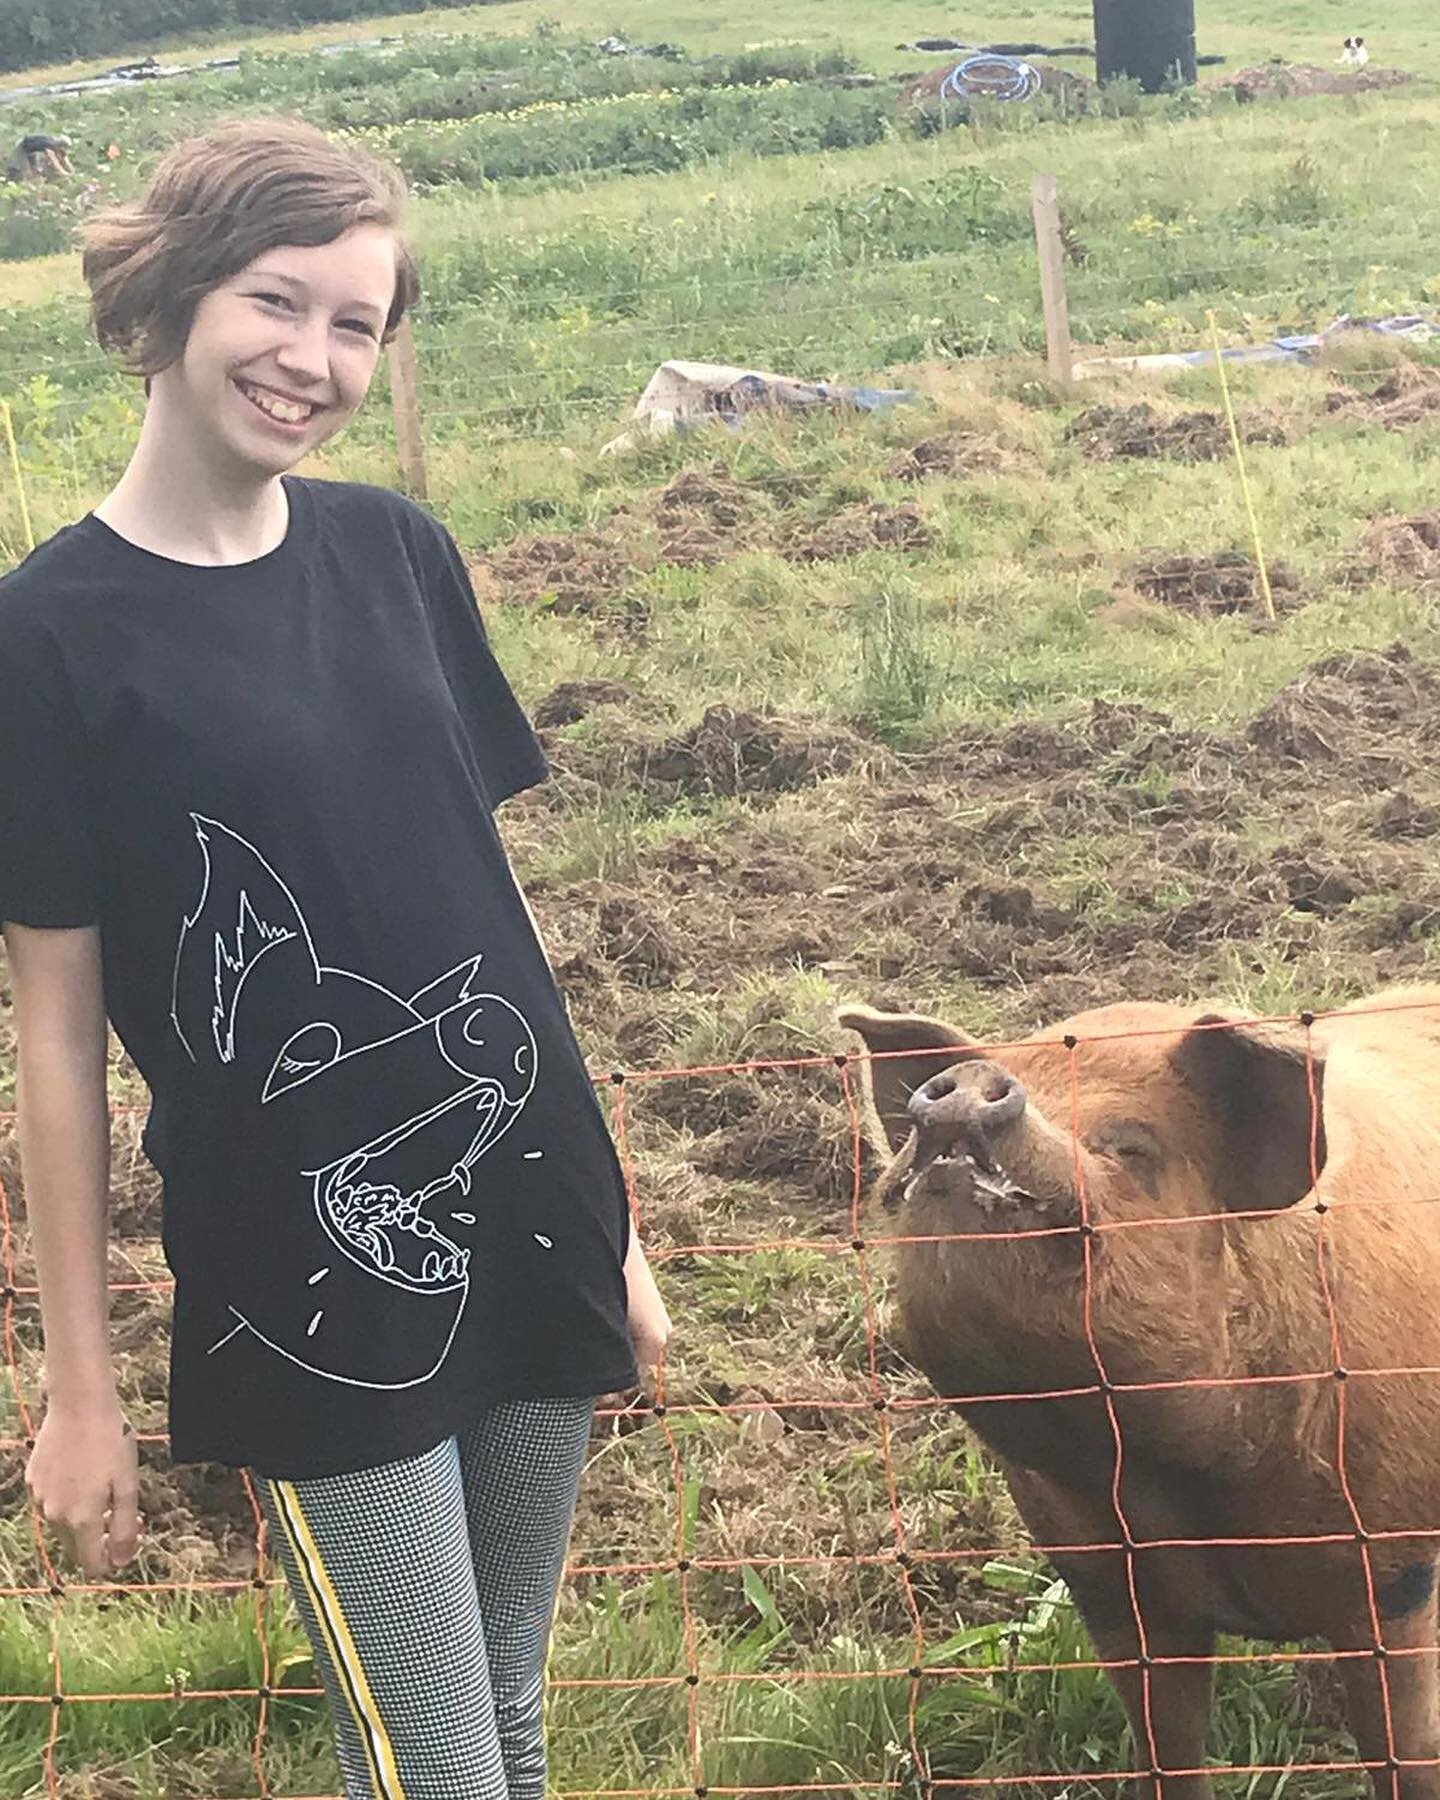 ***MEET ERYN!***

Eryn drew this sweet illustration of our resident pig &ldquo;Gary&rdquo; when she visited the farm this summer. We thought it was SO cool that we had to get it printed into a T-Shirt as we reckon she has a promising future ahead in 